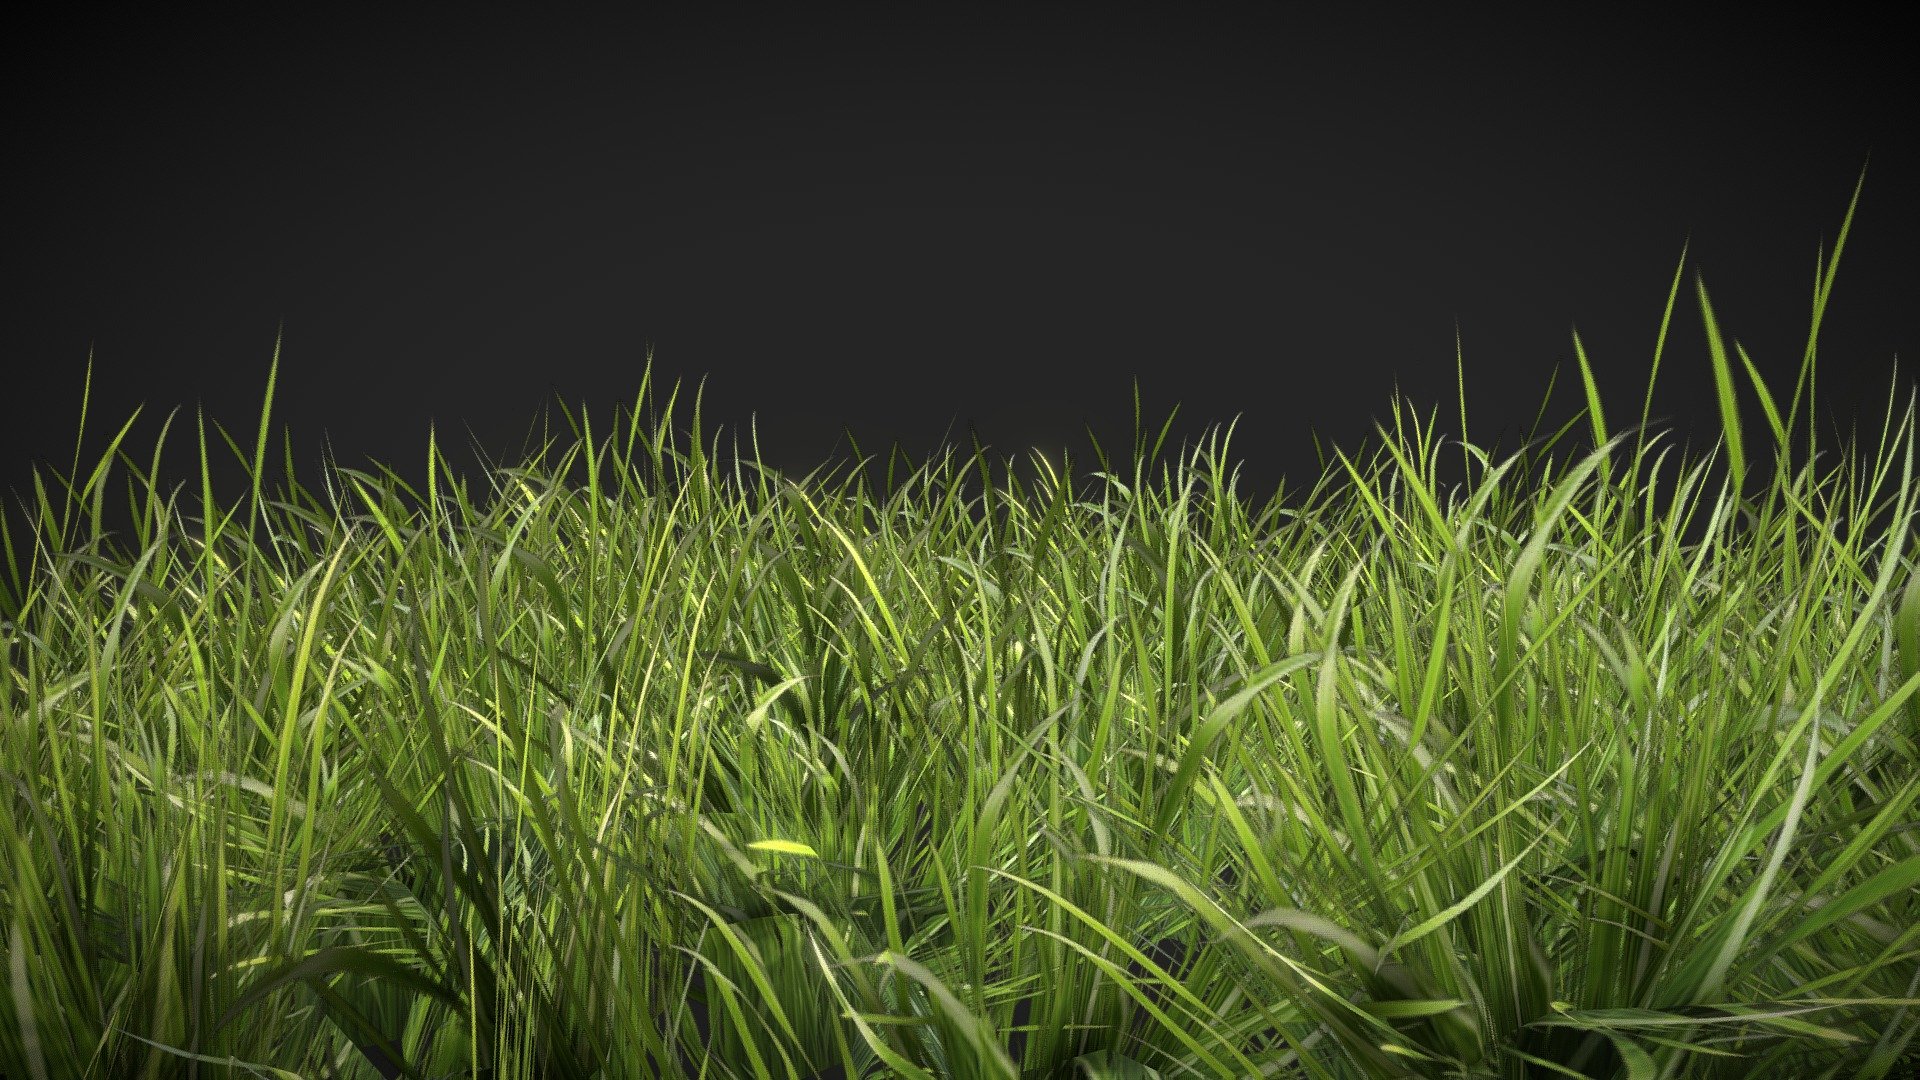 LowPoly GameReady realistic 3D Grass best for games in Unreal,Unity. Fast Lightweight Performance 920 polygons total 3d model